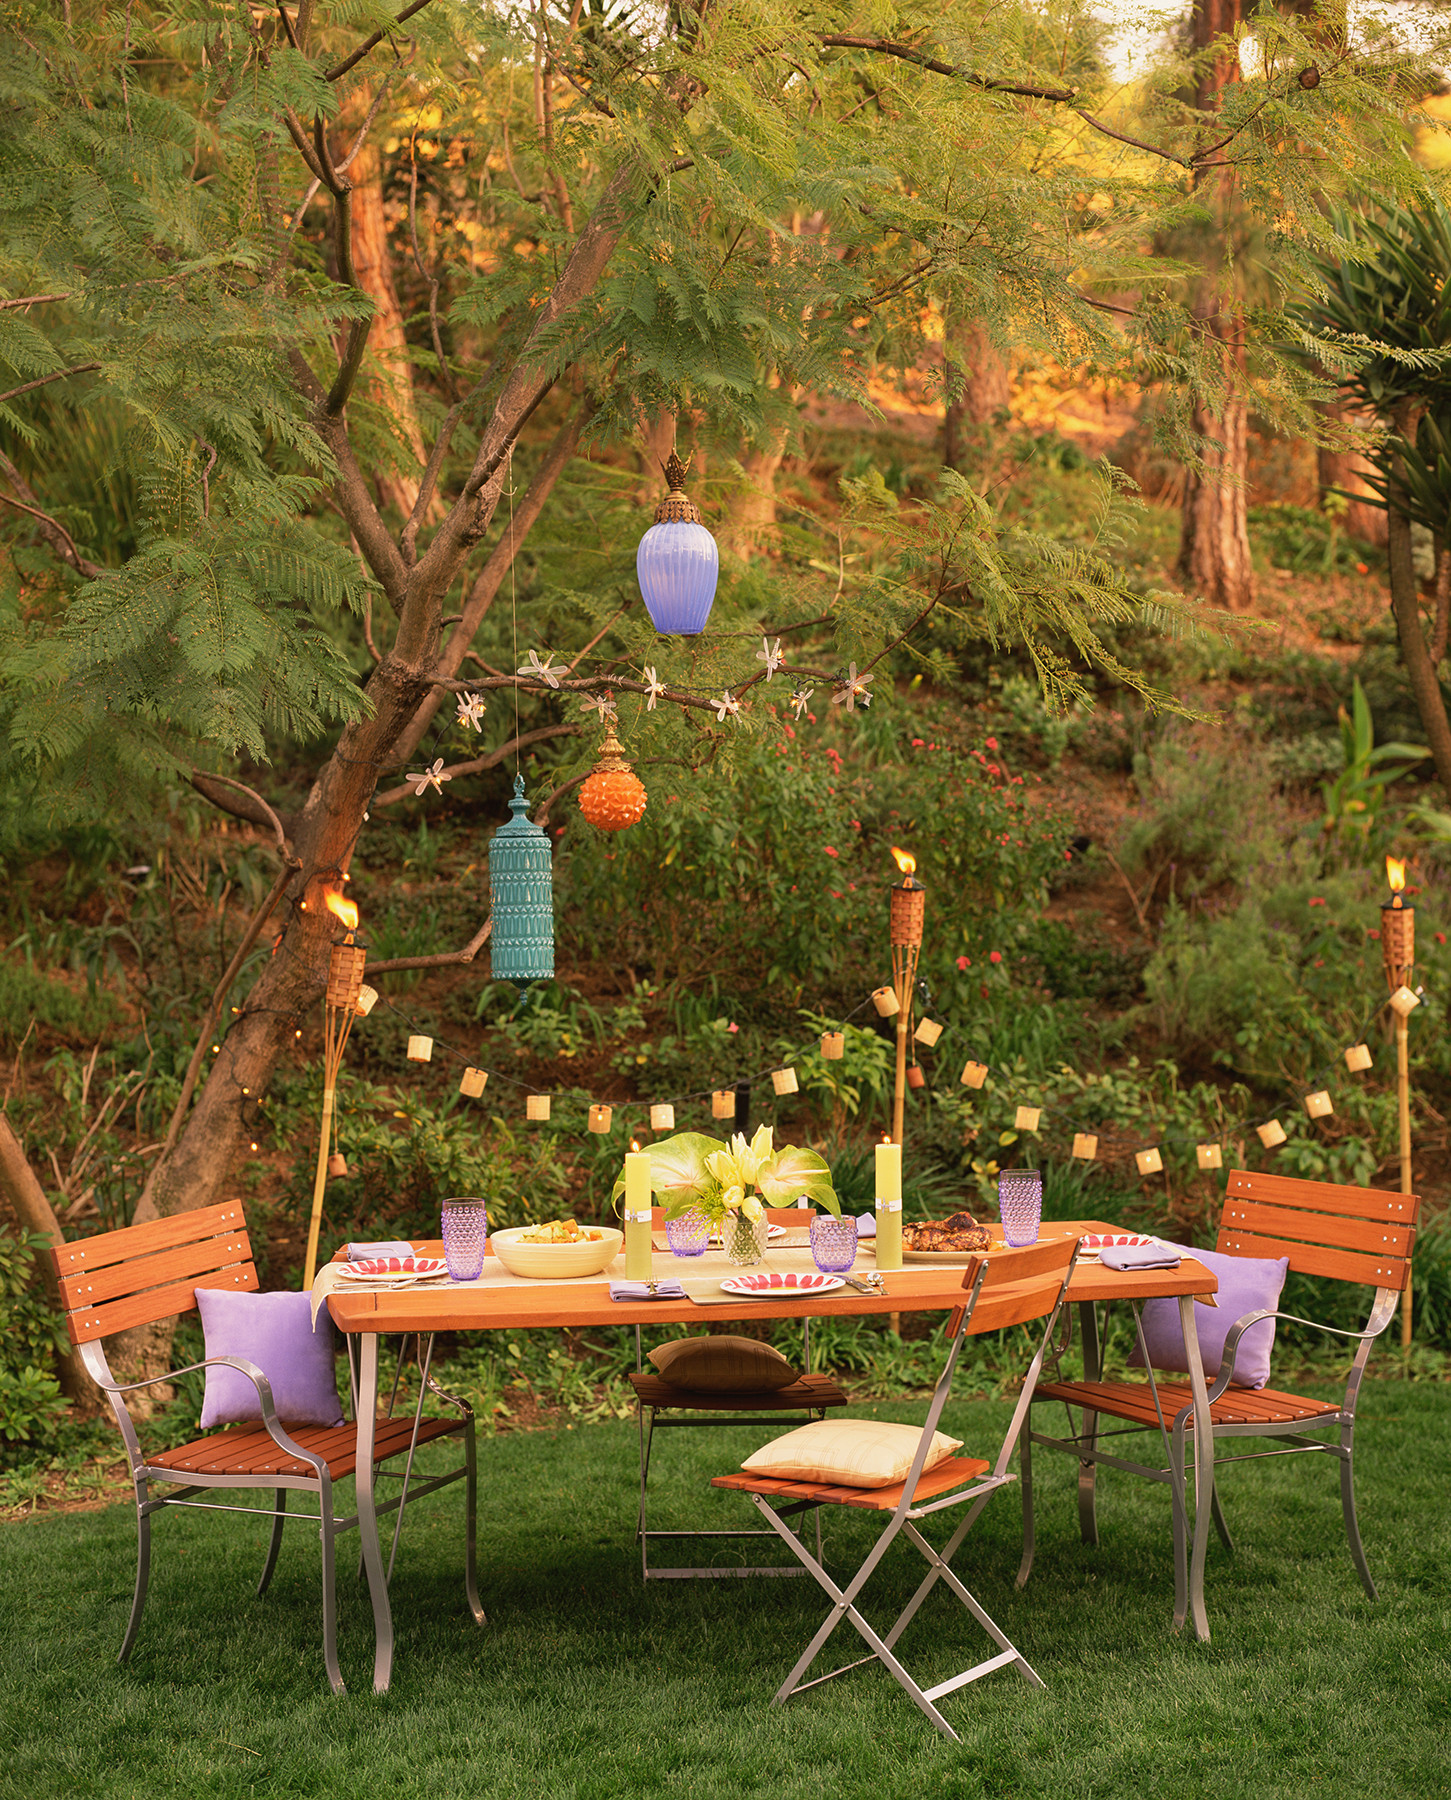 Outdoor Summer Birthday Party Ideas
 17 Outdoor Party Ideas for an Effortless Backyard